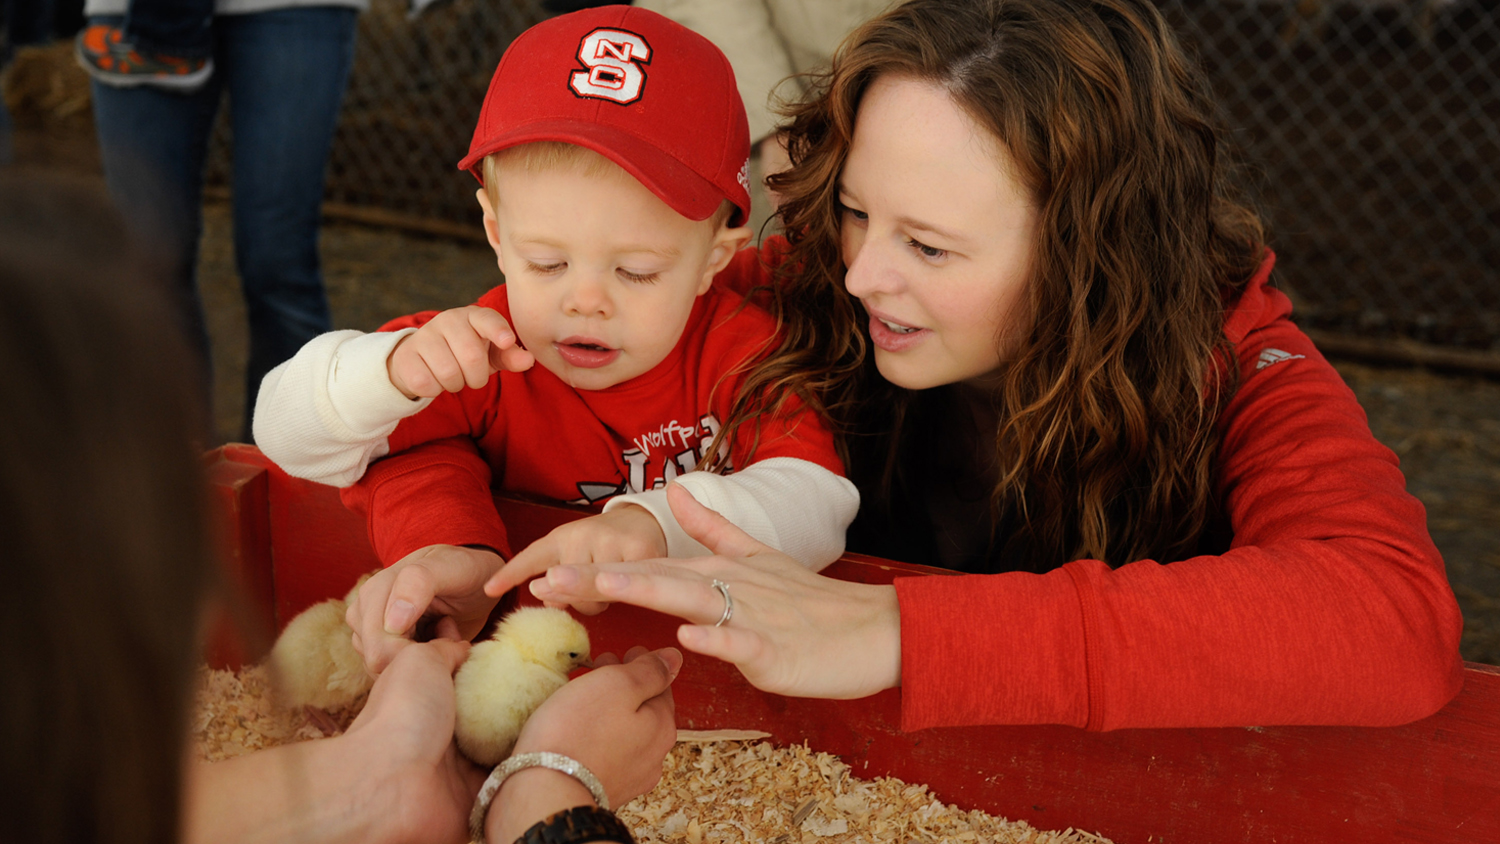 A young child and a woman petting baby chickens.